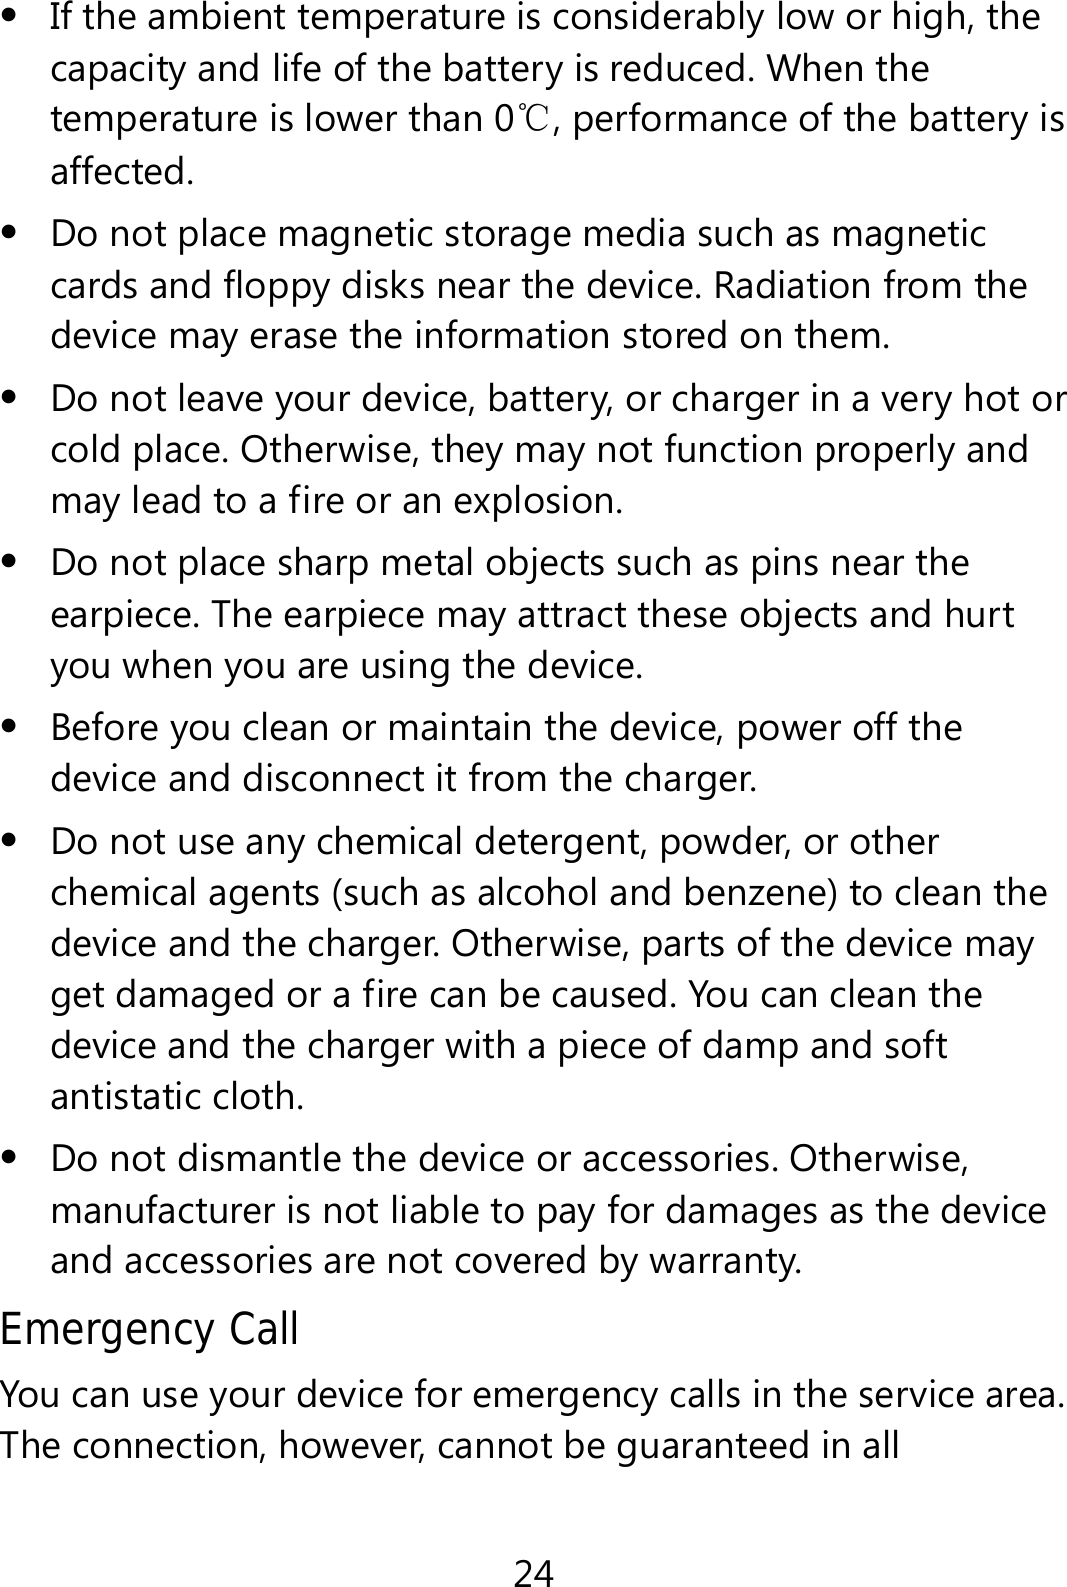 24  If the ambient temperature is considerably low or high, the capacity and life of the battery is reduced. When the temperature is lower than 0℃, performance of the battery is affected.  Do not place magnetic storage media such as magnetic cards and floppy disks near the device. Radiation from the device may erase the information stored on them.  Do not leave your device, battery, or charger in a very hot or cold place. Otherwise, they may not function properly and may lead to a fire or an explosion.  Do not place sharp metal objects such as pins near the earpiece. The earpiece may attract these objects and hurt you when you are using the device.  Before you clean or maintain the device, power off the device and disconnect it from the charger.    Do not use any chemical detergent, powder, or other chemical agents (such as alcohol and benzene) to clean the device and the charger. Otherwise, parts of the device may get damaged or a fire can be caused. You can clean the device and the charger with a piece of damp and soft antistatic cloth.  Do not dismantle the device or accessories. Otherwise, manufacturer is not liable to pay for damages as the device and accessories are not covered by warranty. Emergency Call You can use your device for emergency calls in the service area. The connection, however, cannot be guaranteed in all 